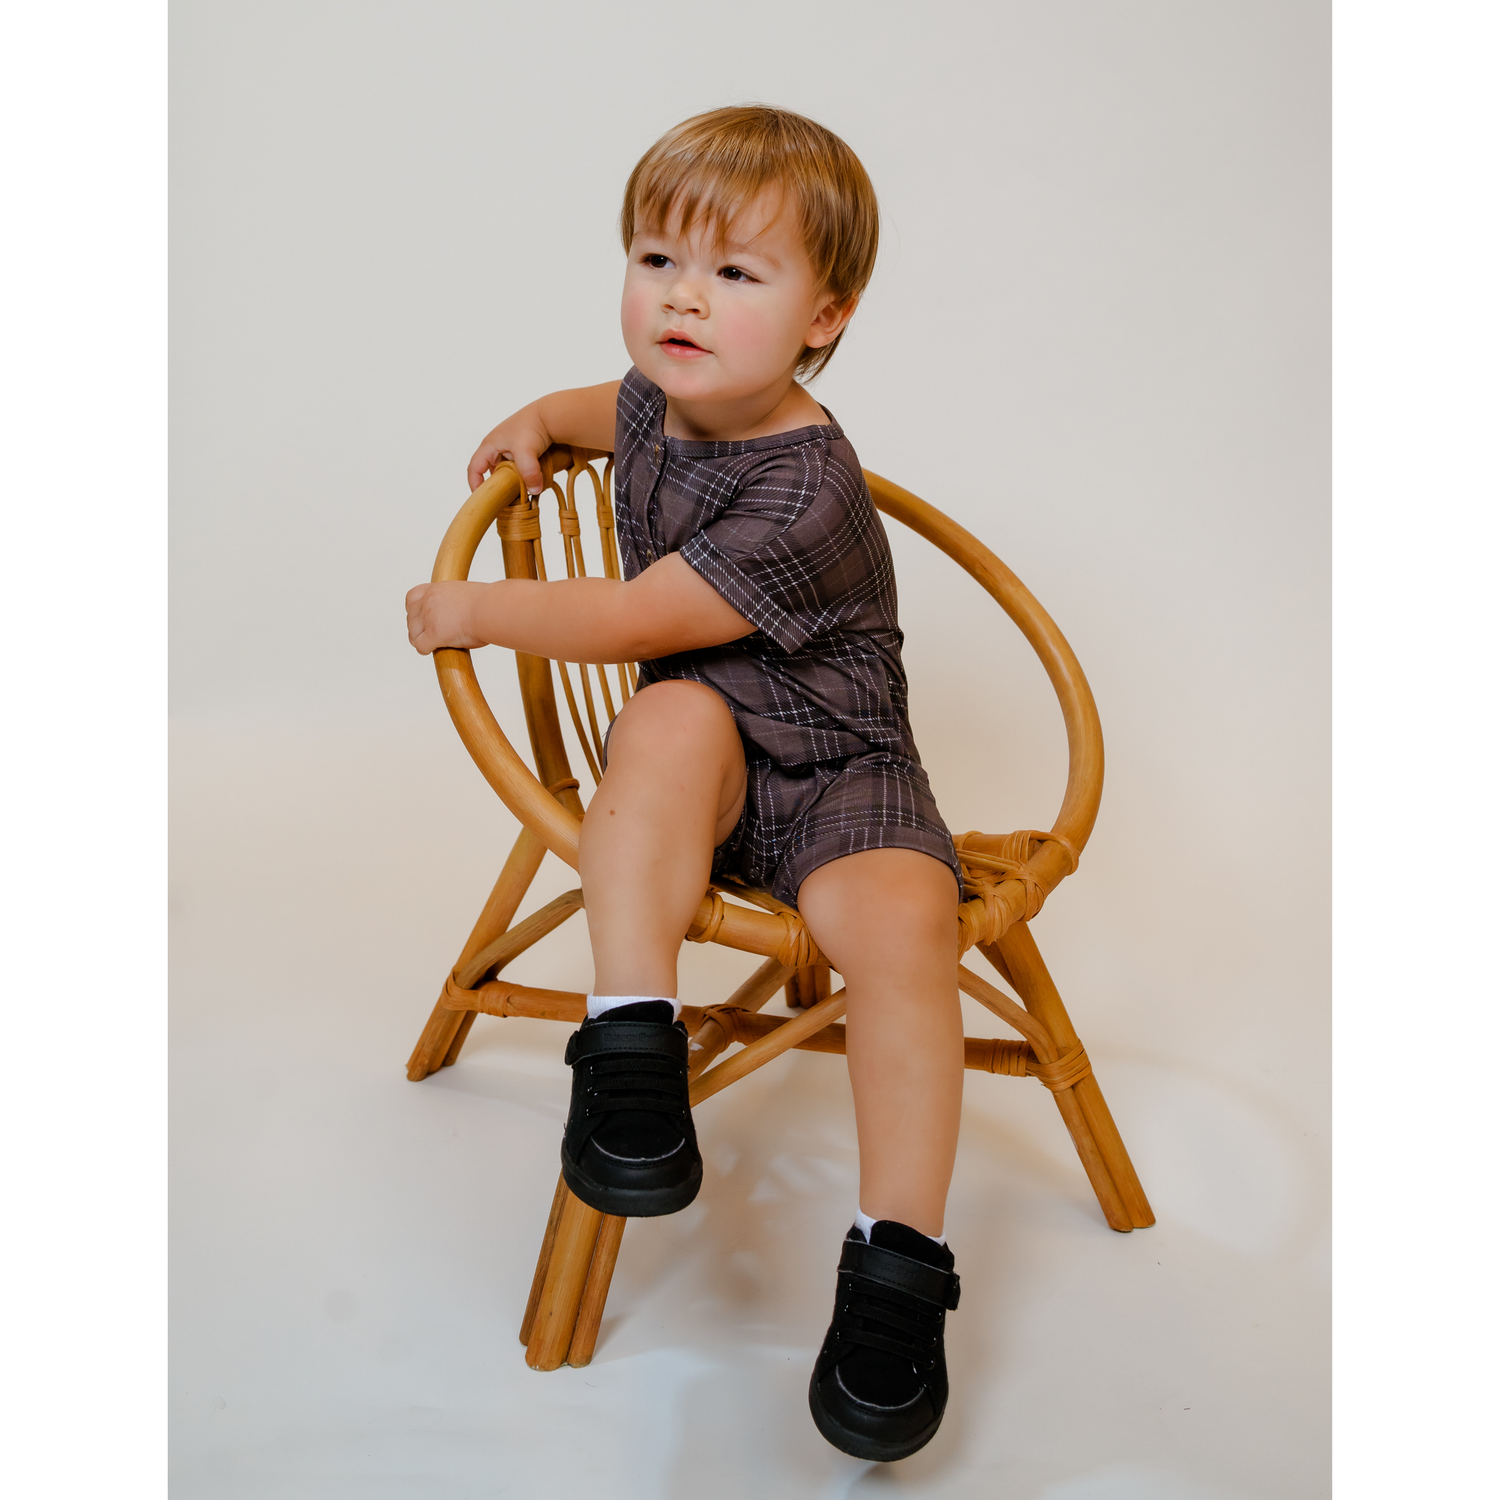 Toddler wearing our soft, Bamboo Shortie Jumpsuit Romper in dark Charcoal Gray and Black Plaid abstract print